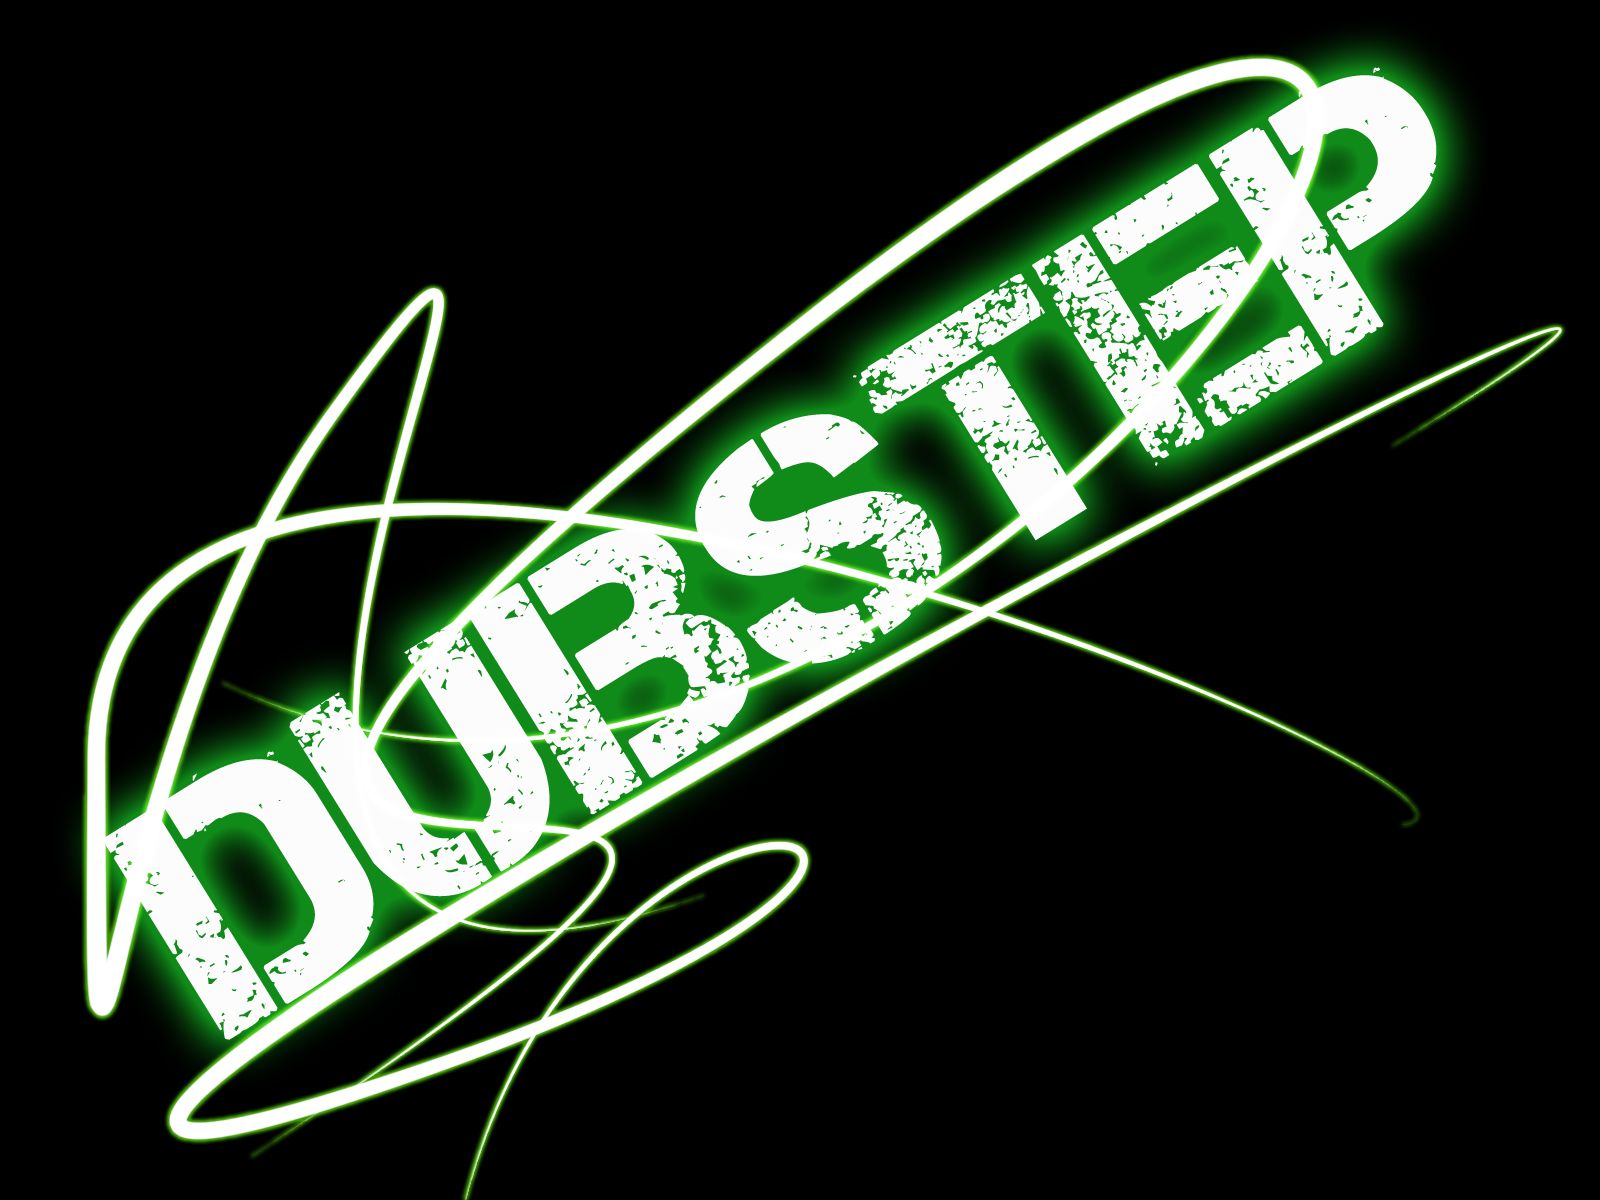 83 Dubstep HD Wallpapers | Backgrounds - Wallpaper Abyss